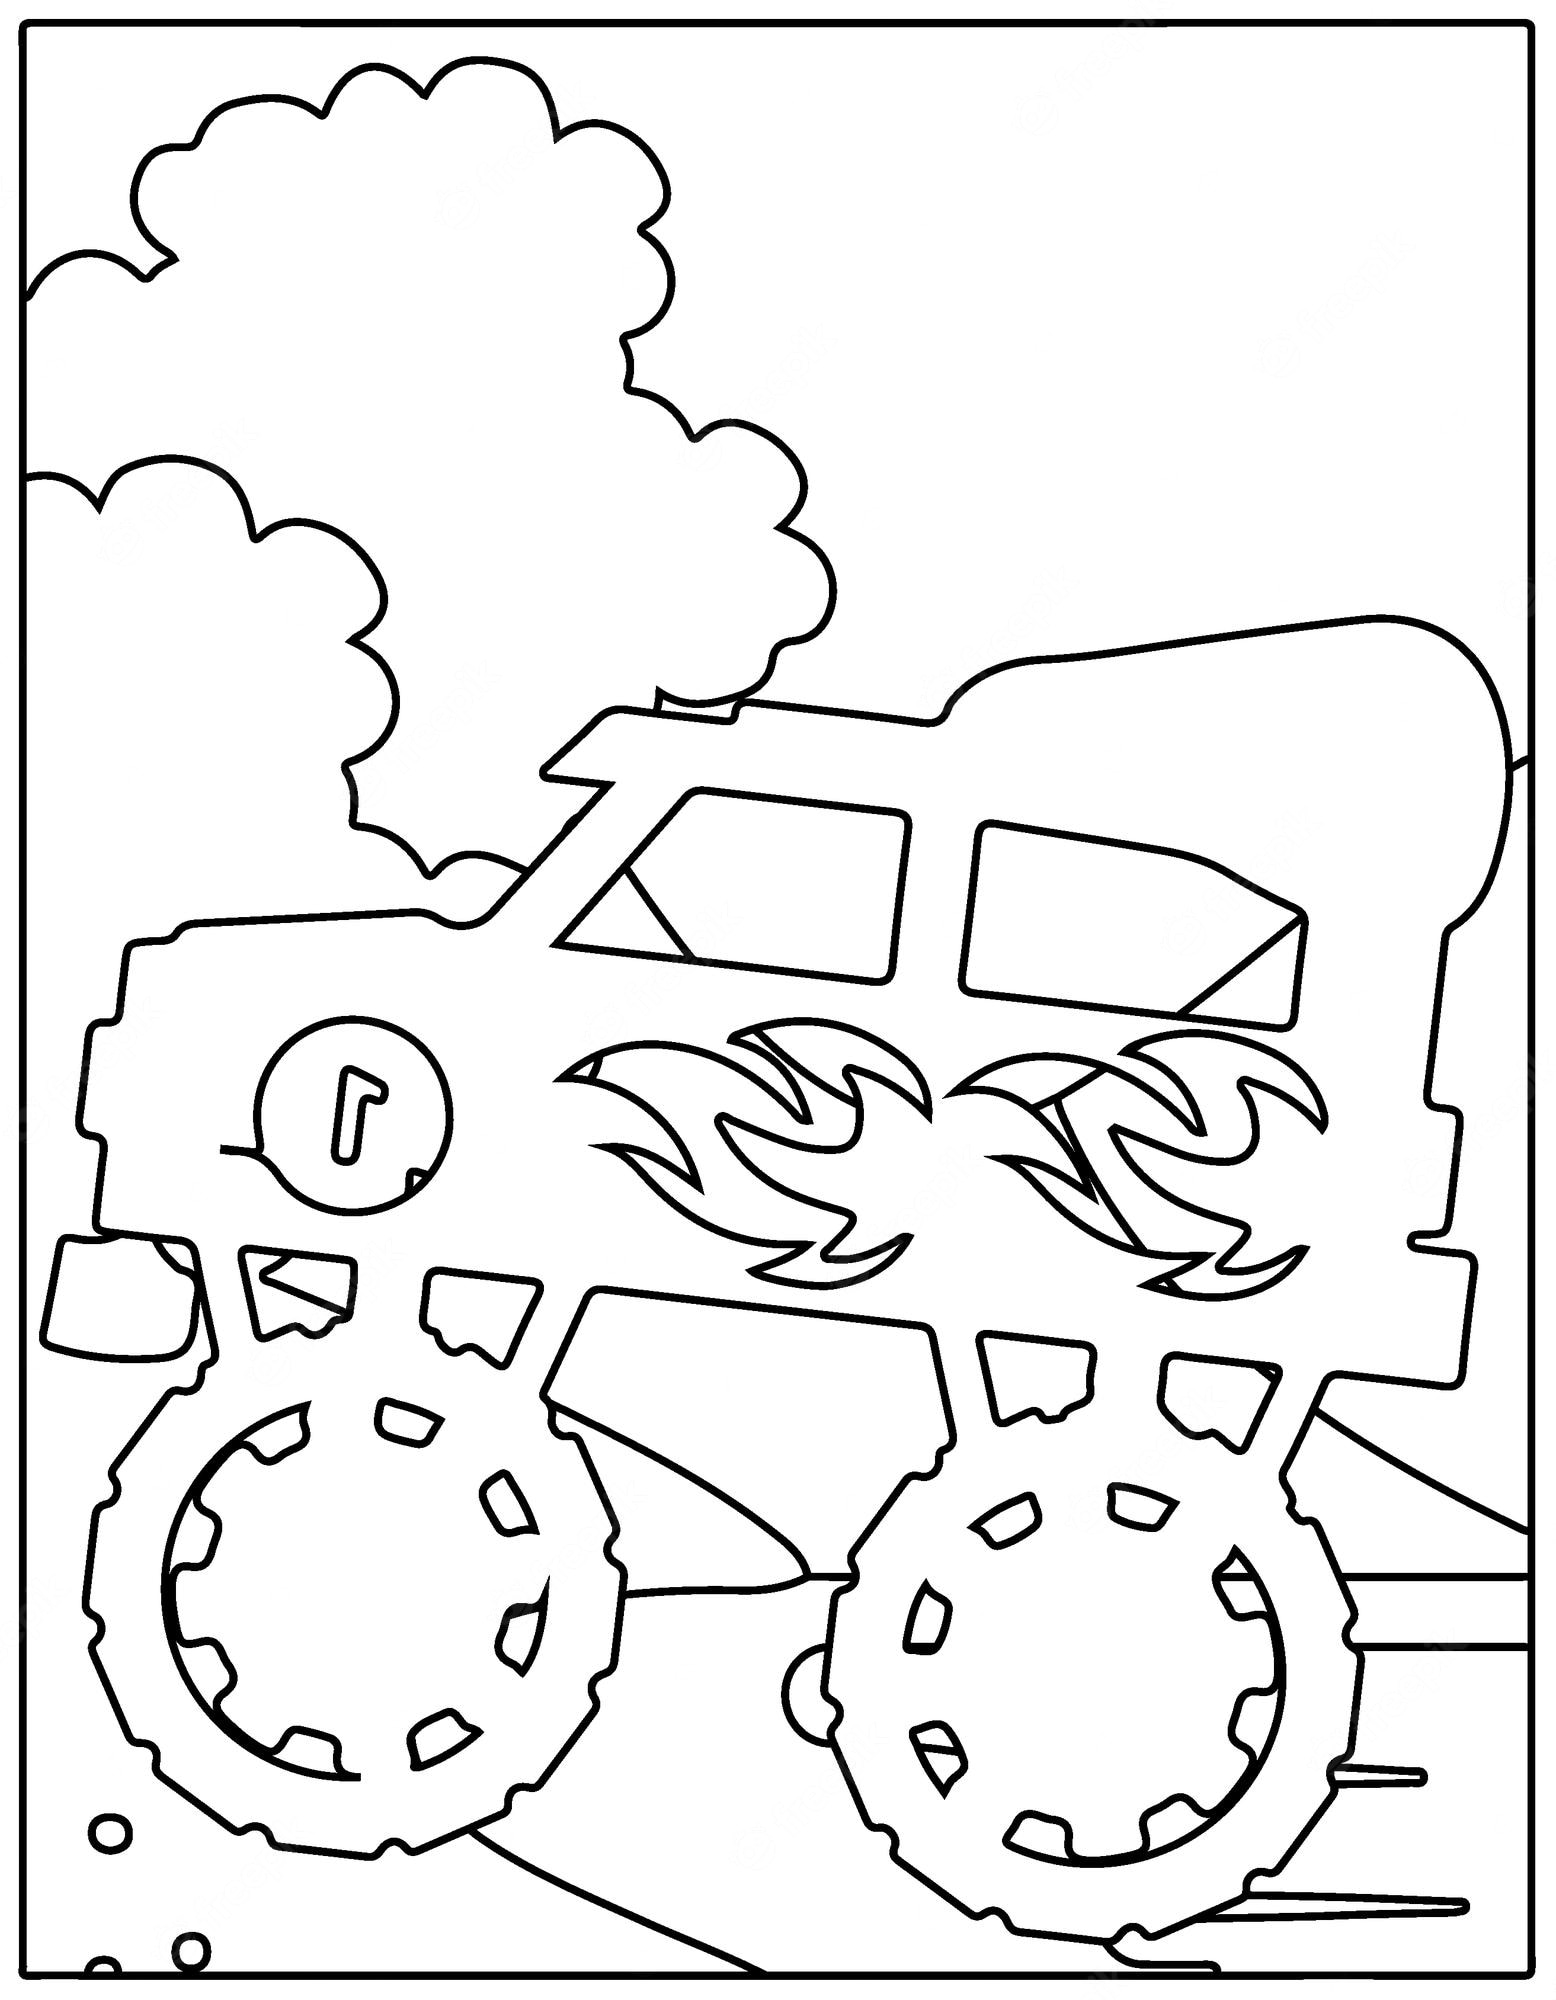 Premium Vector | Cartoon funny off roadmonster truck coloring pages